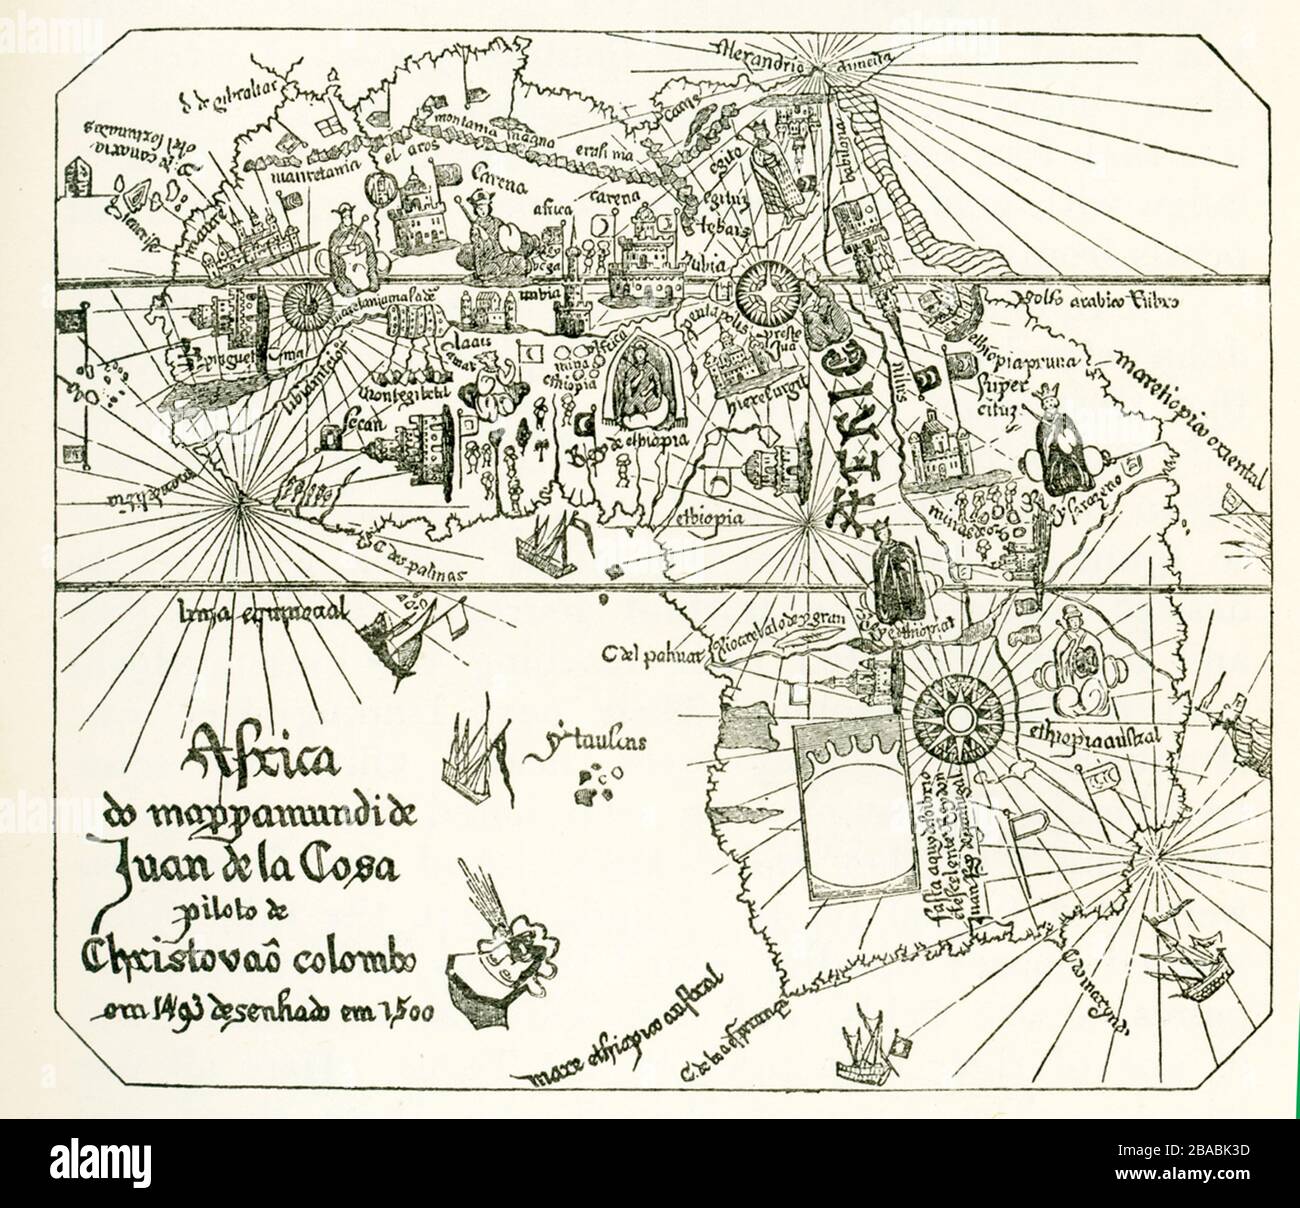 Shown here is how Africa was believed to be shaped after Vasco Da Gama’s expeditions. This map is a section of  Juan de la Cosa’s map in 1500. Juan de la Cosa was a Castilian navigator and cartographer, known for designing the earliest European world map that incorporated the territories of the Americas that were discovered in the 15th century. Vasco da Gama was a Portuguese explorer and the first European to reach India by sea. His initial voyage to India was the first to link Europe and Asia by an ocean route, connecting the Atlantic and the Indian oceans and therefore, the West and the Orie Stock Photo